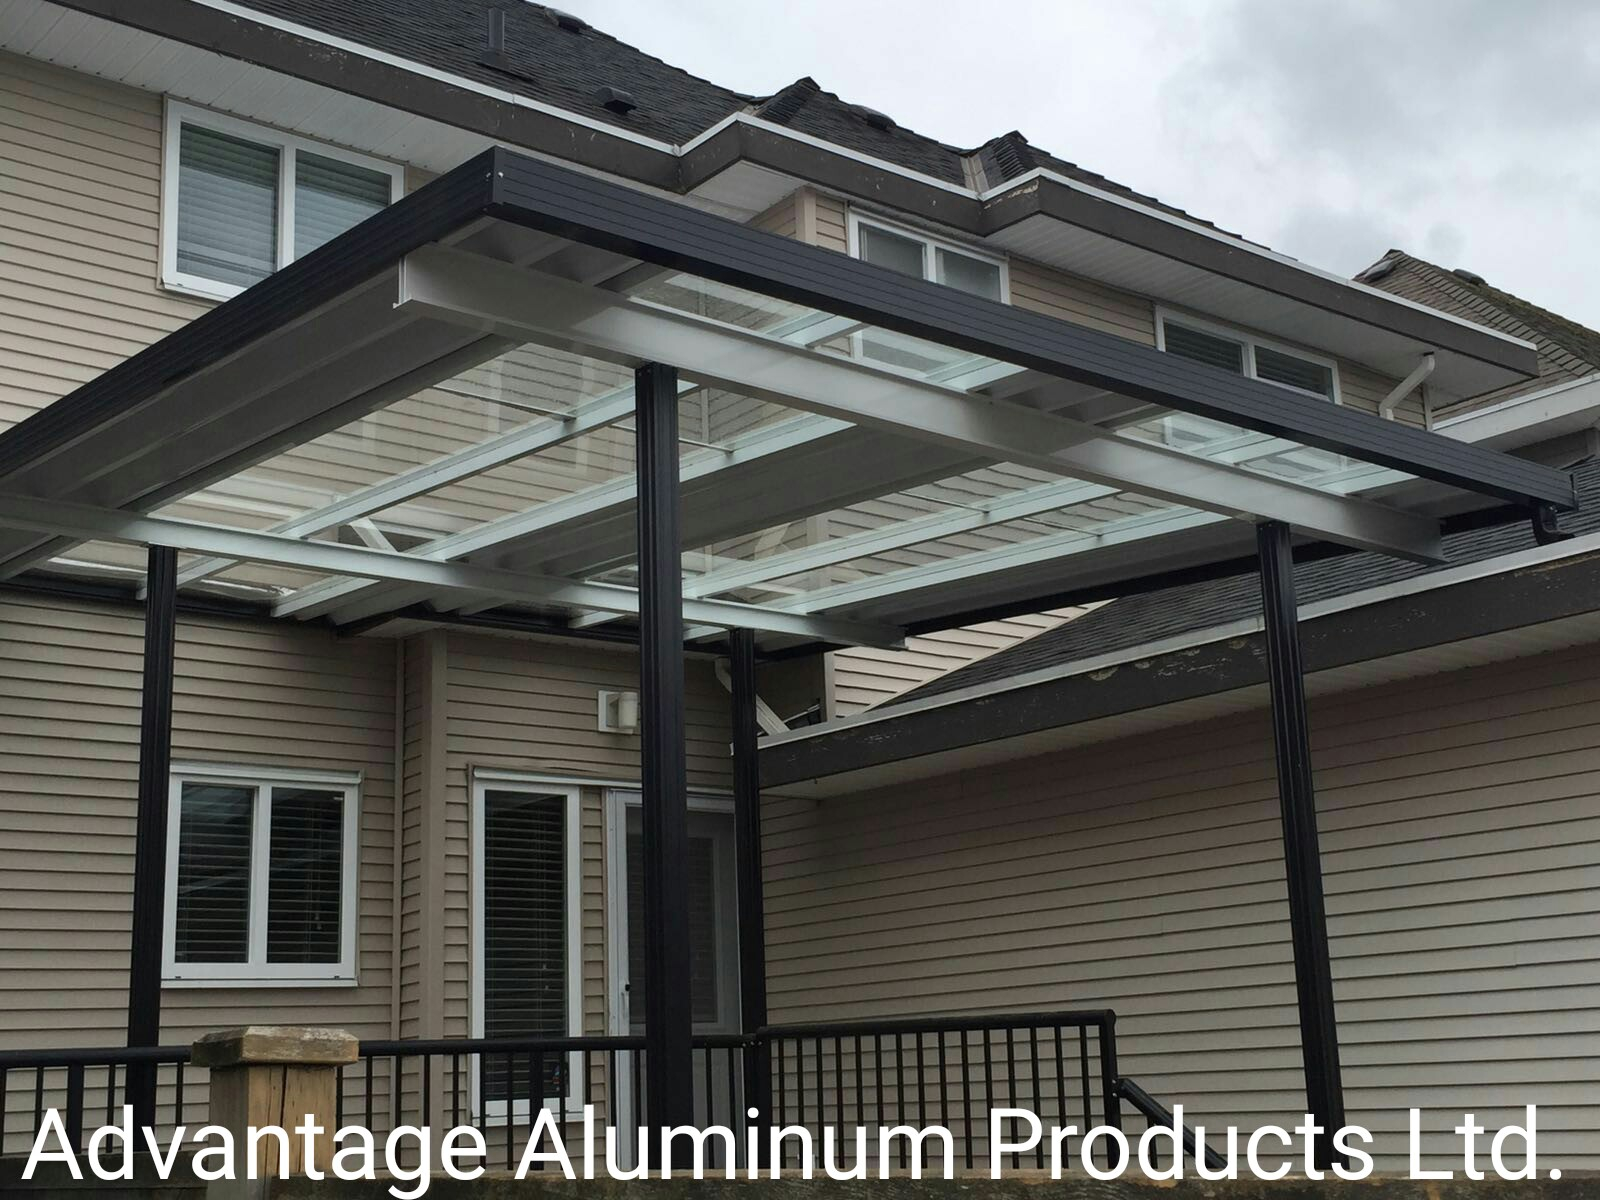 Best Quality Patio Cover Is At Advantage Aluminum Products with regard to size 1600 X 1200